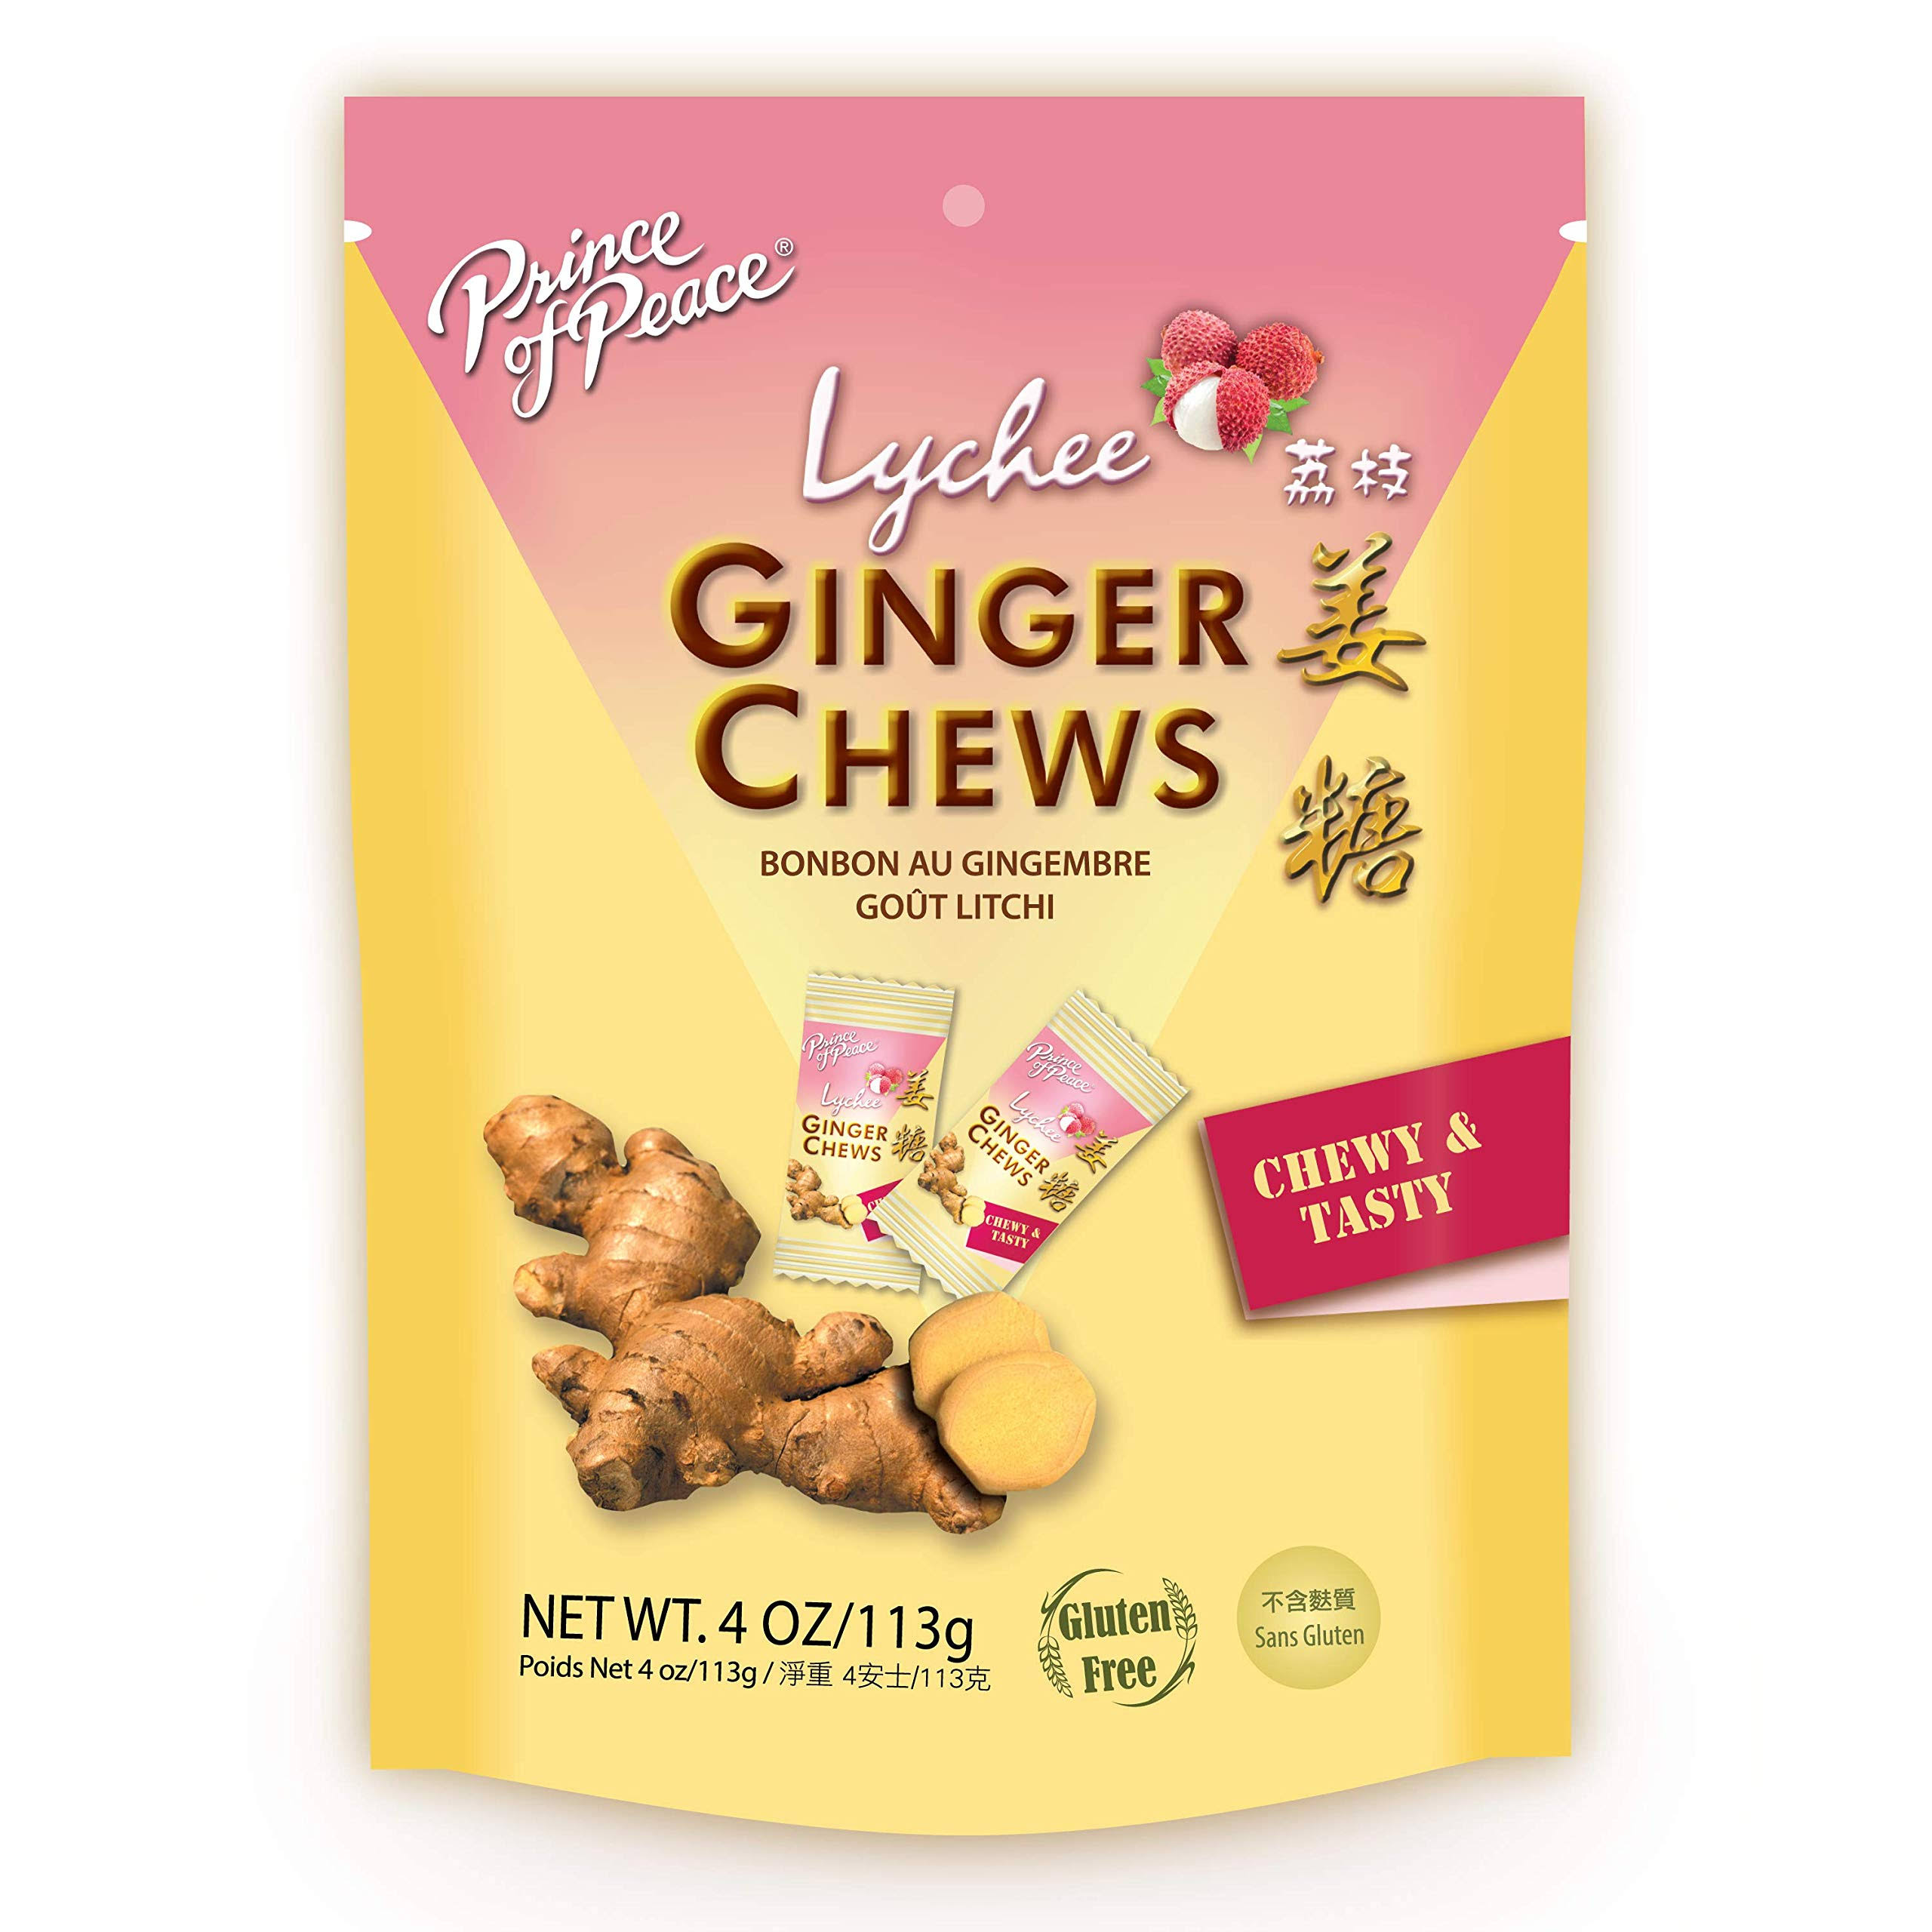 Prince of Peace Ginger Chews - Lychee, 4oz